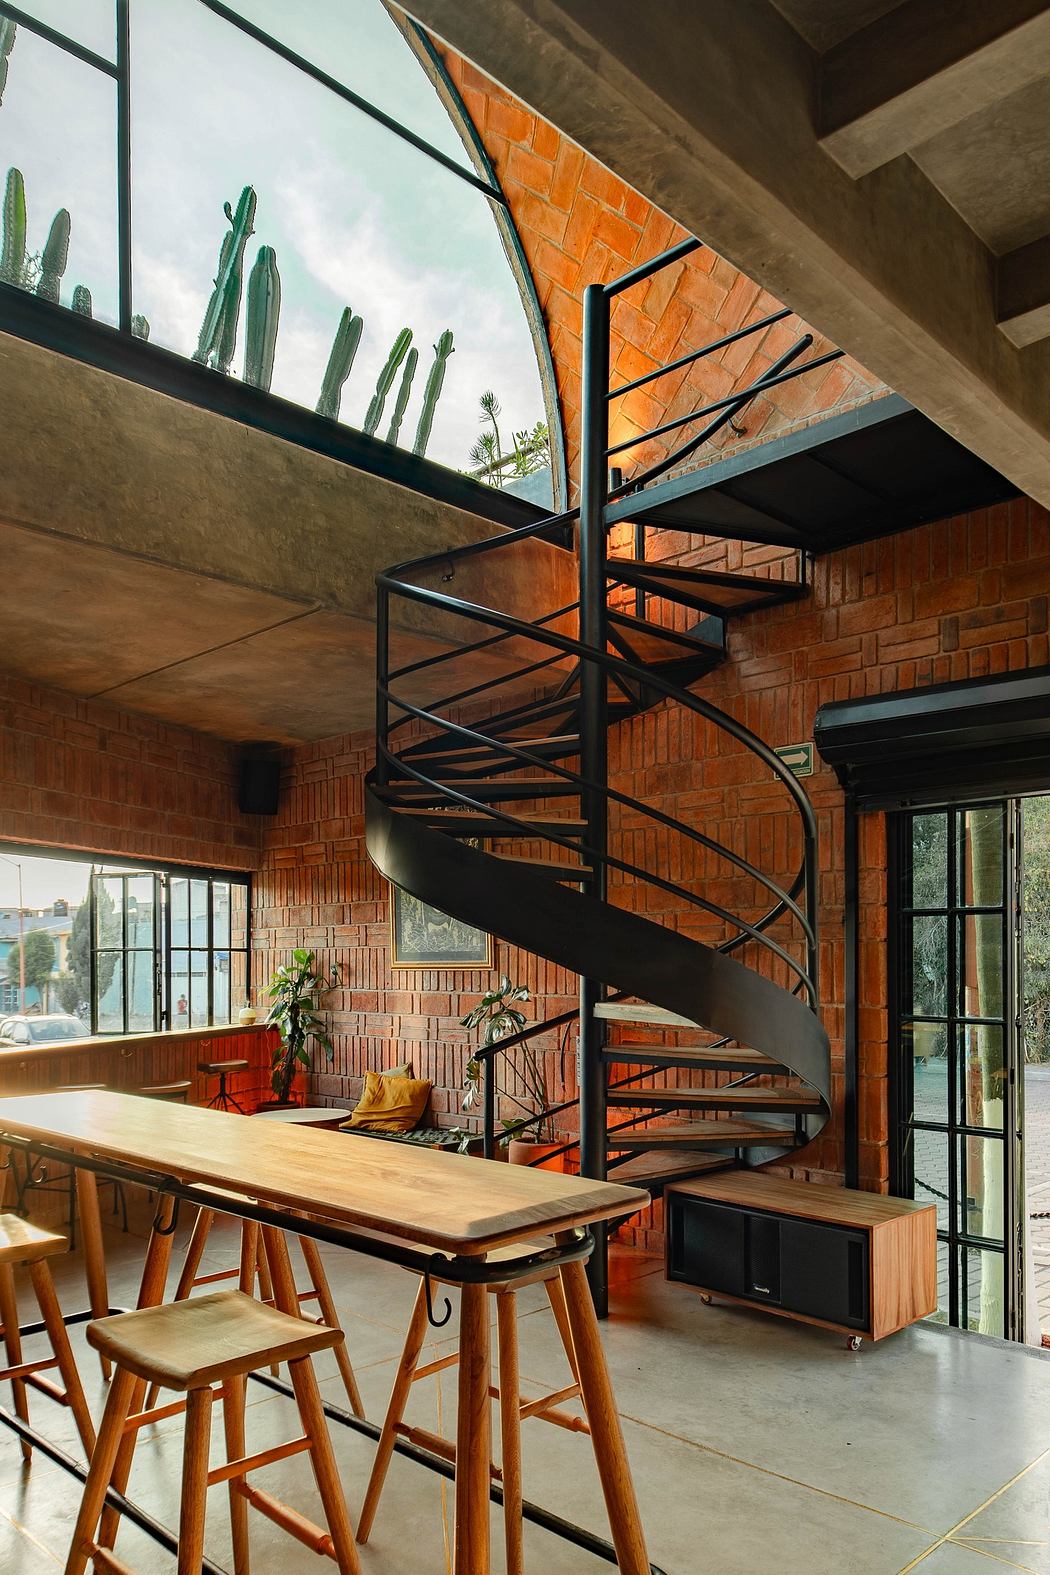 Modern interior with spiral staircase, exposed brick, and large windows.